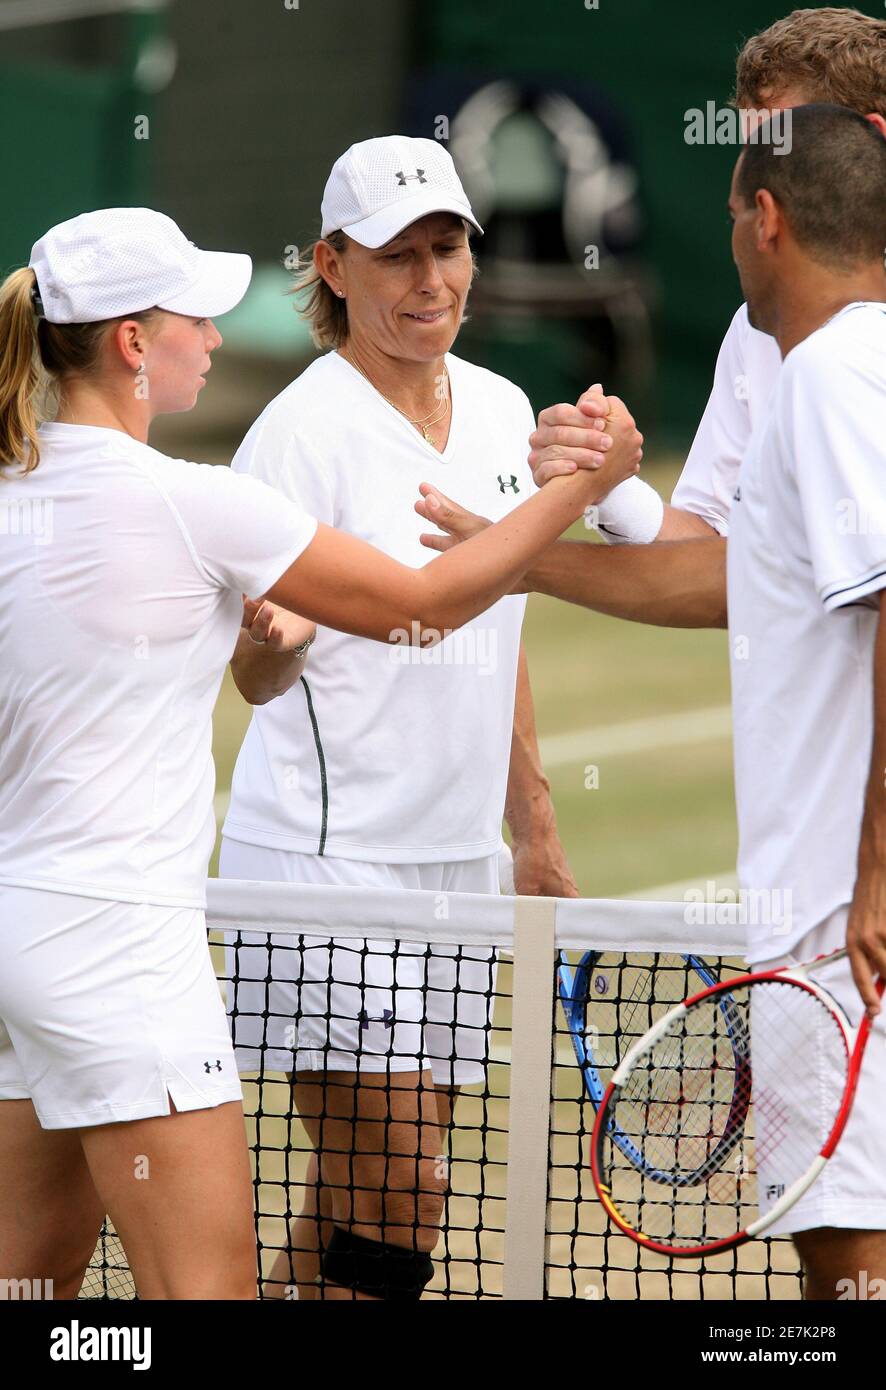 Martina Navratilova of the U.S. (2nd L) shakes hands with Israel's Andy Ram (R) after losing her mixed doubles match, with Mark Knowles of the Bahamas, and Russia's Vera Zvonareva (L) at the Wimbledon tennis championships in London July 6, 2006. This year was the last year Navratilova will play at Wimbeldon. REUTERS/Alessia Pierdomenico       (BRITAIN) Stock Photo